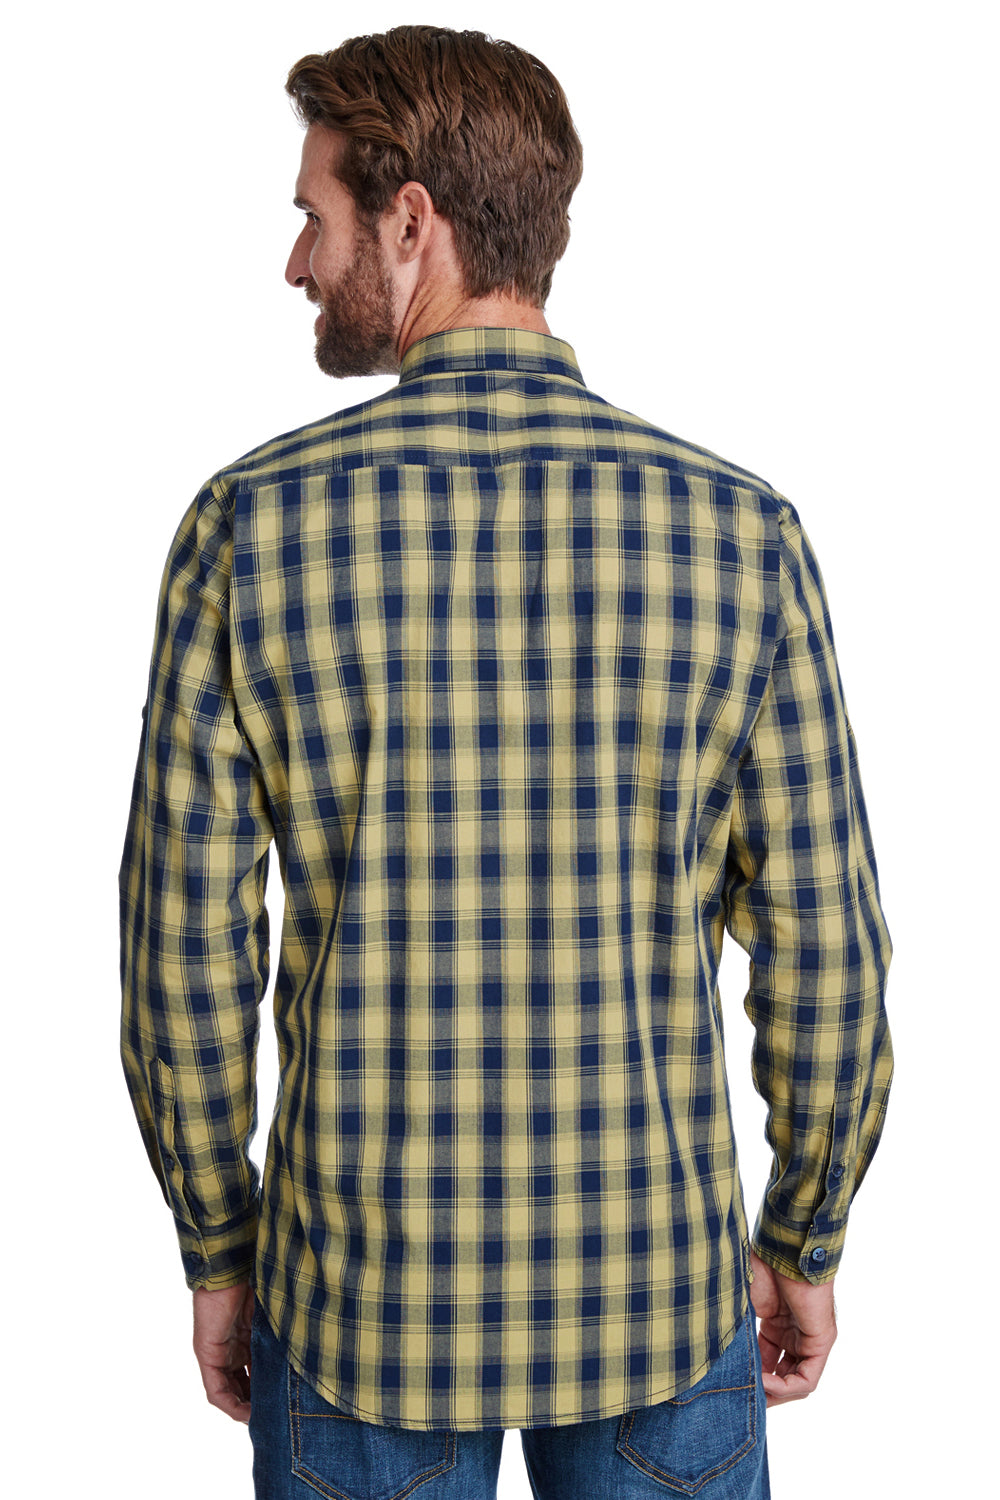 Artisan Collection RP250 Mens Mulligan Check Long Sleeve Button Down Shirt Camel Brown/Navy Blue Model Back